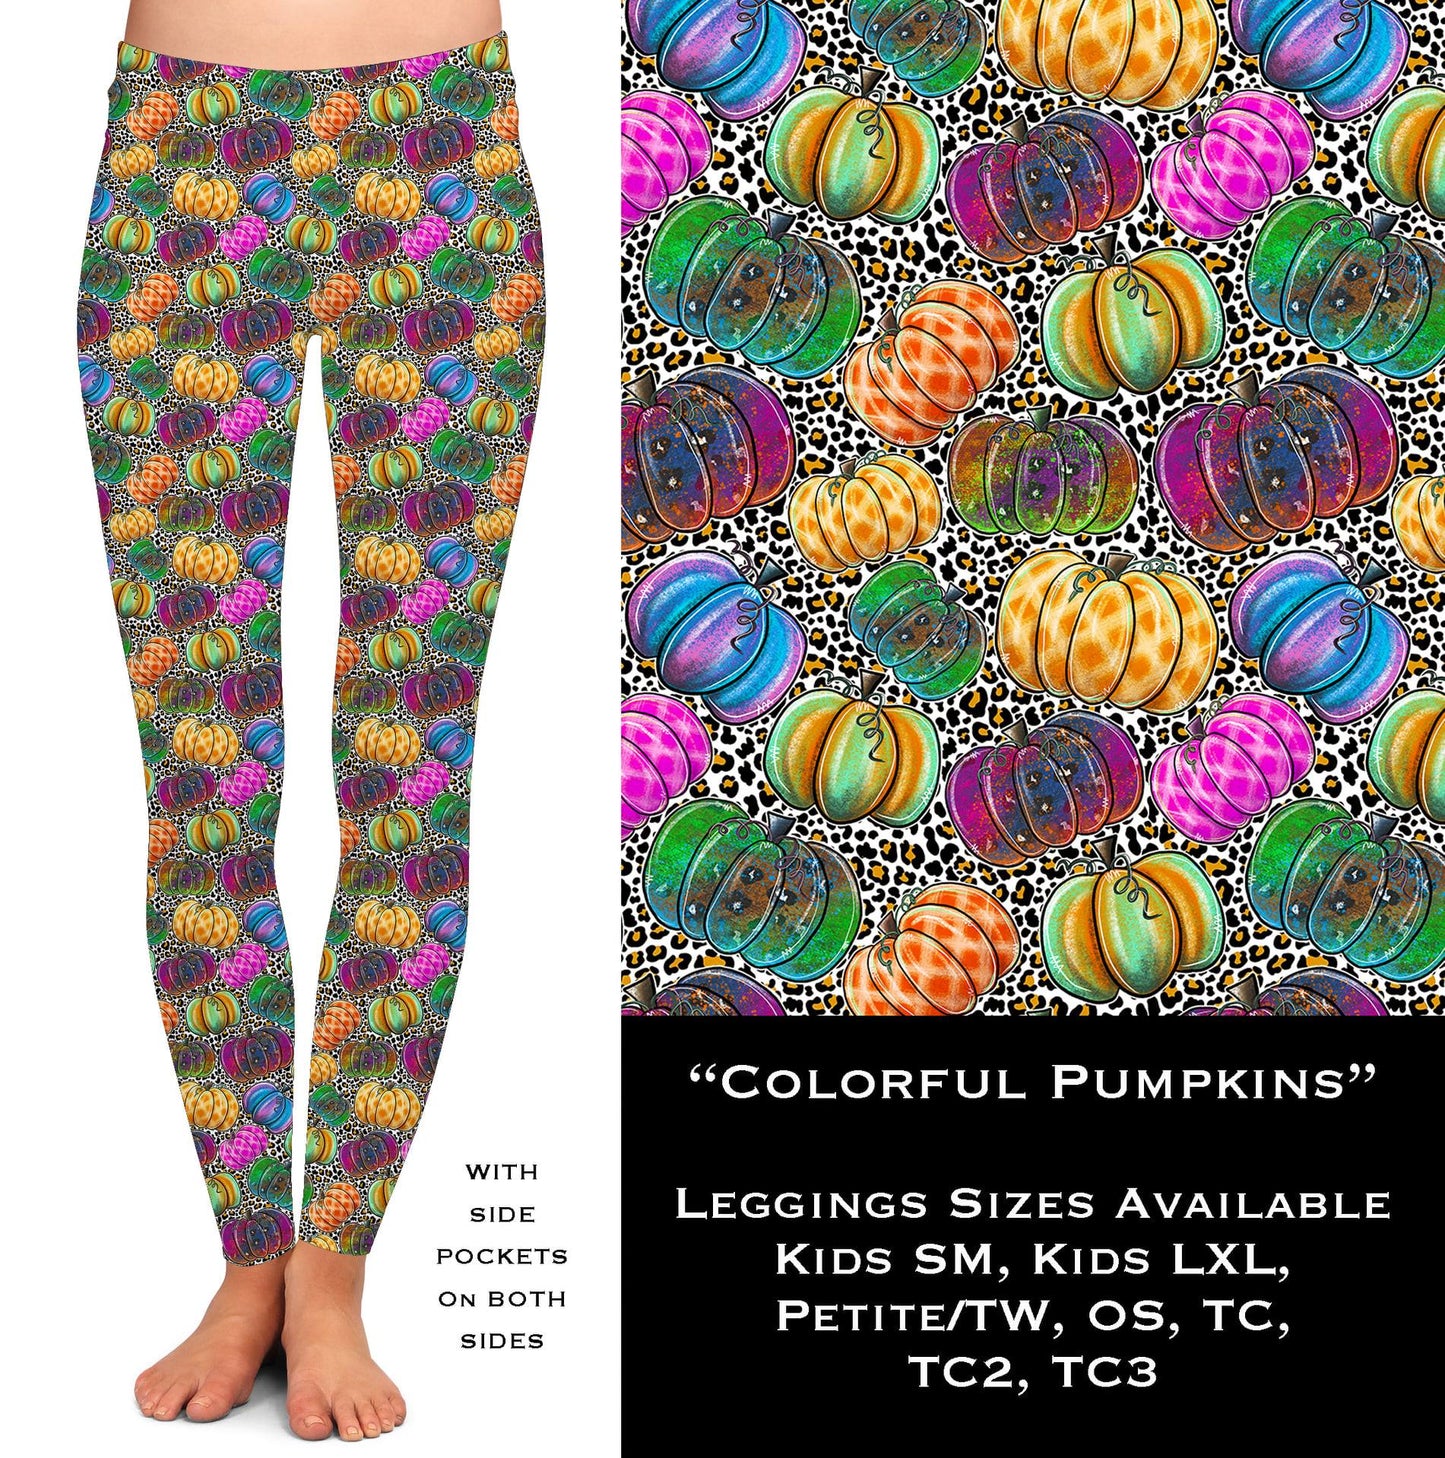 Colorful Pumpkins - Leggings with Pockets